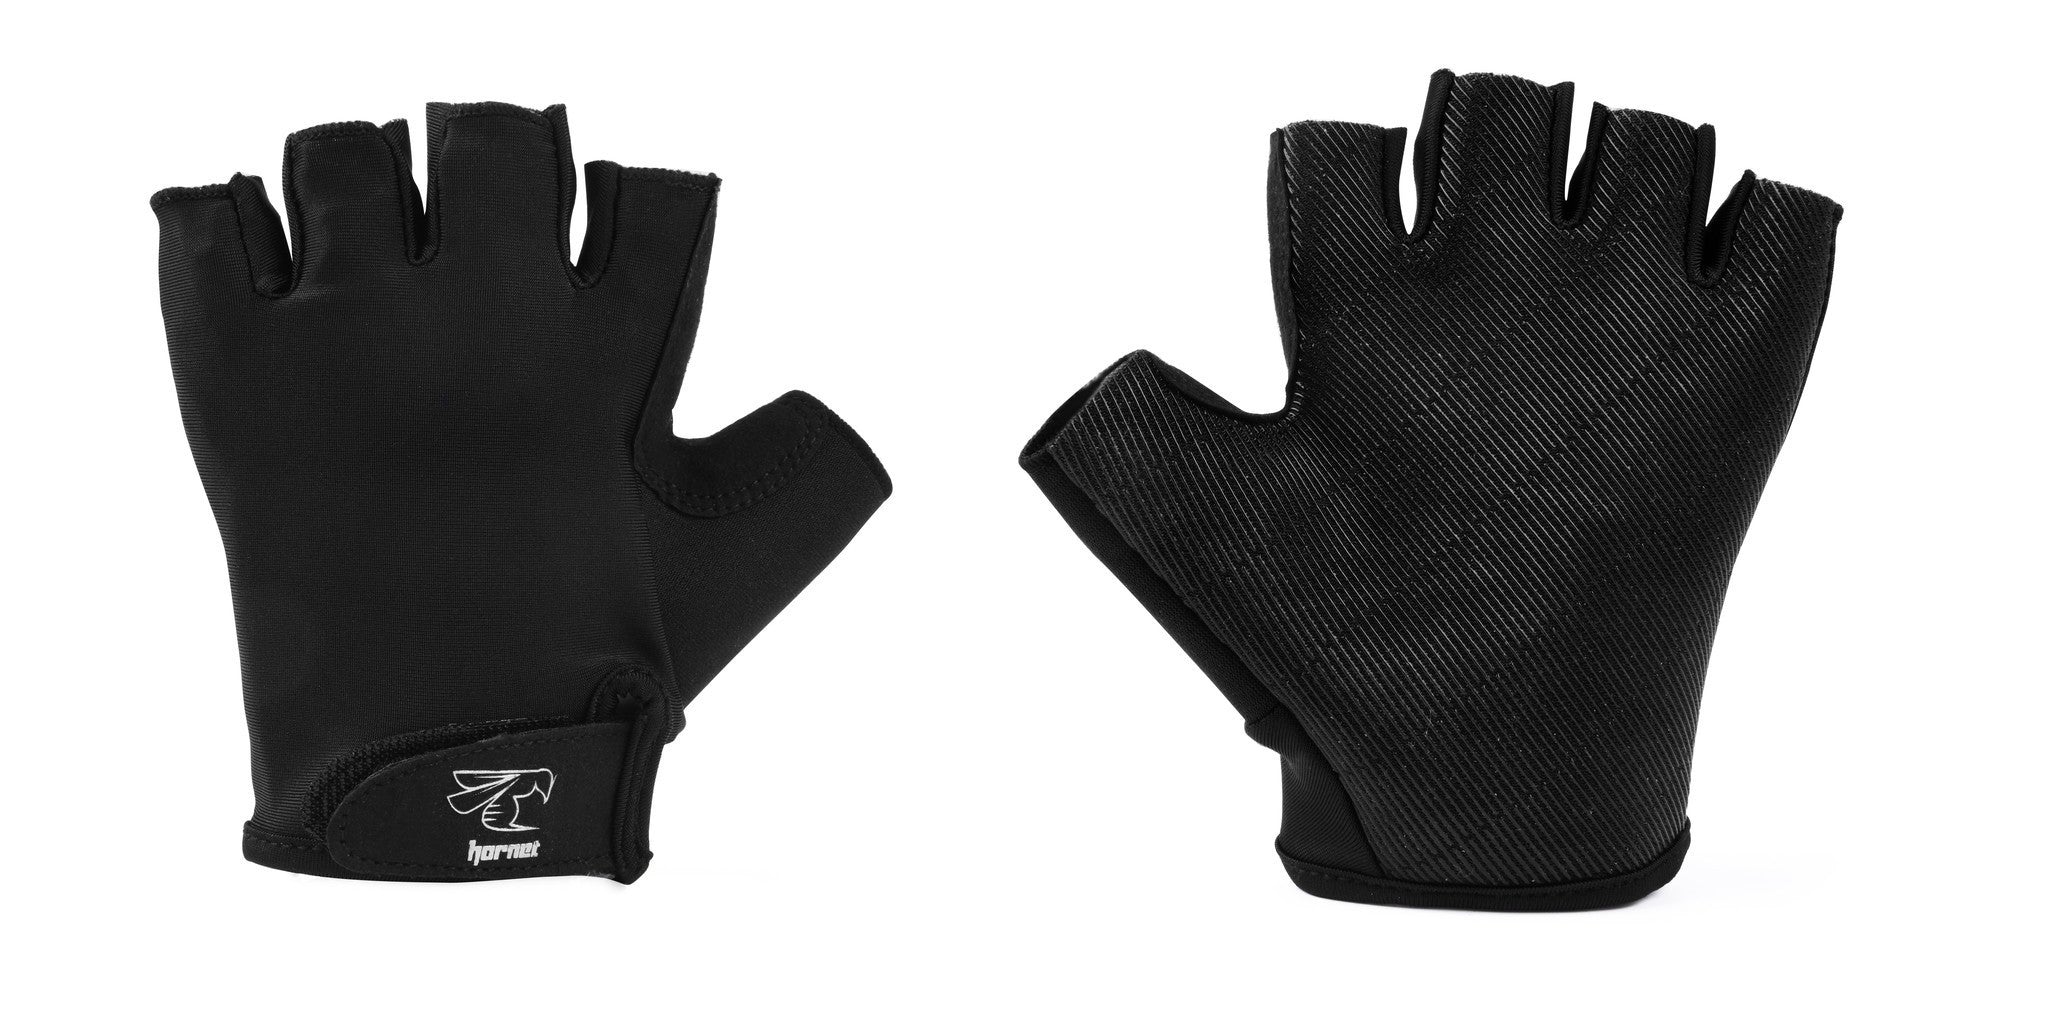 Best Deal for Fingerless Rowing Gloves. Perfect Fitness Gloves for Rowing